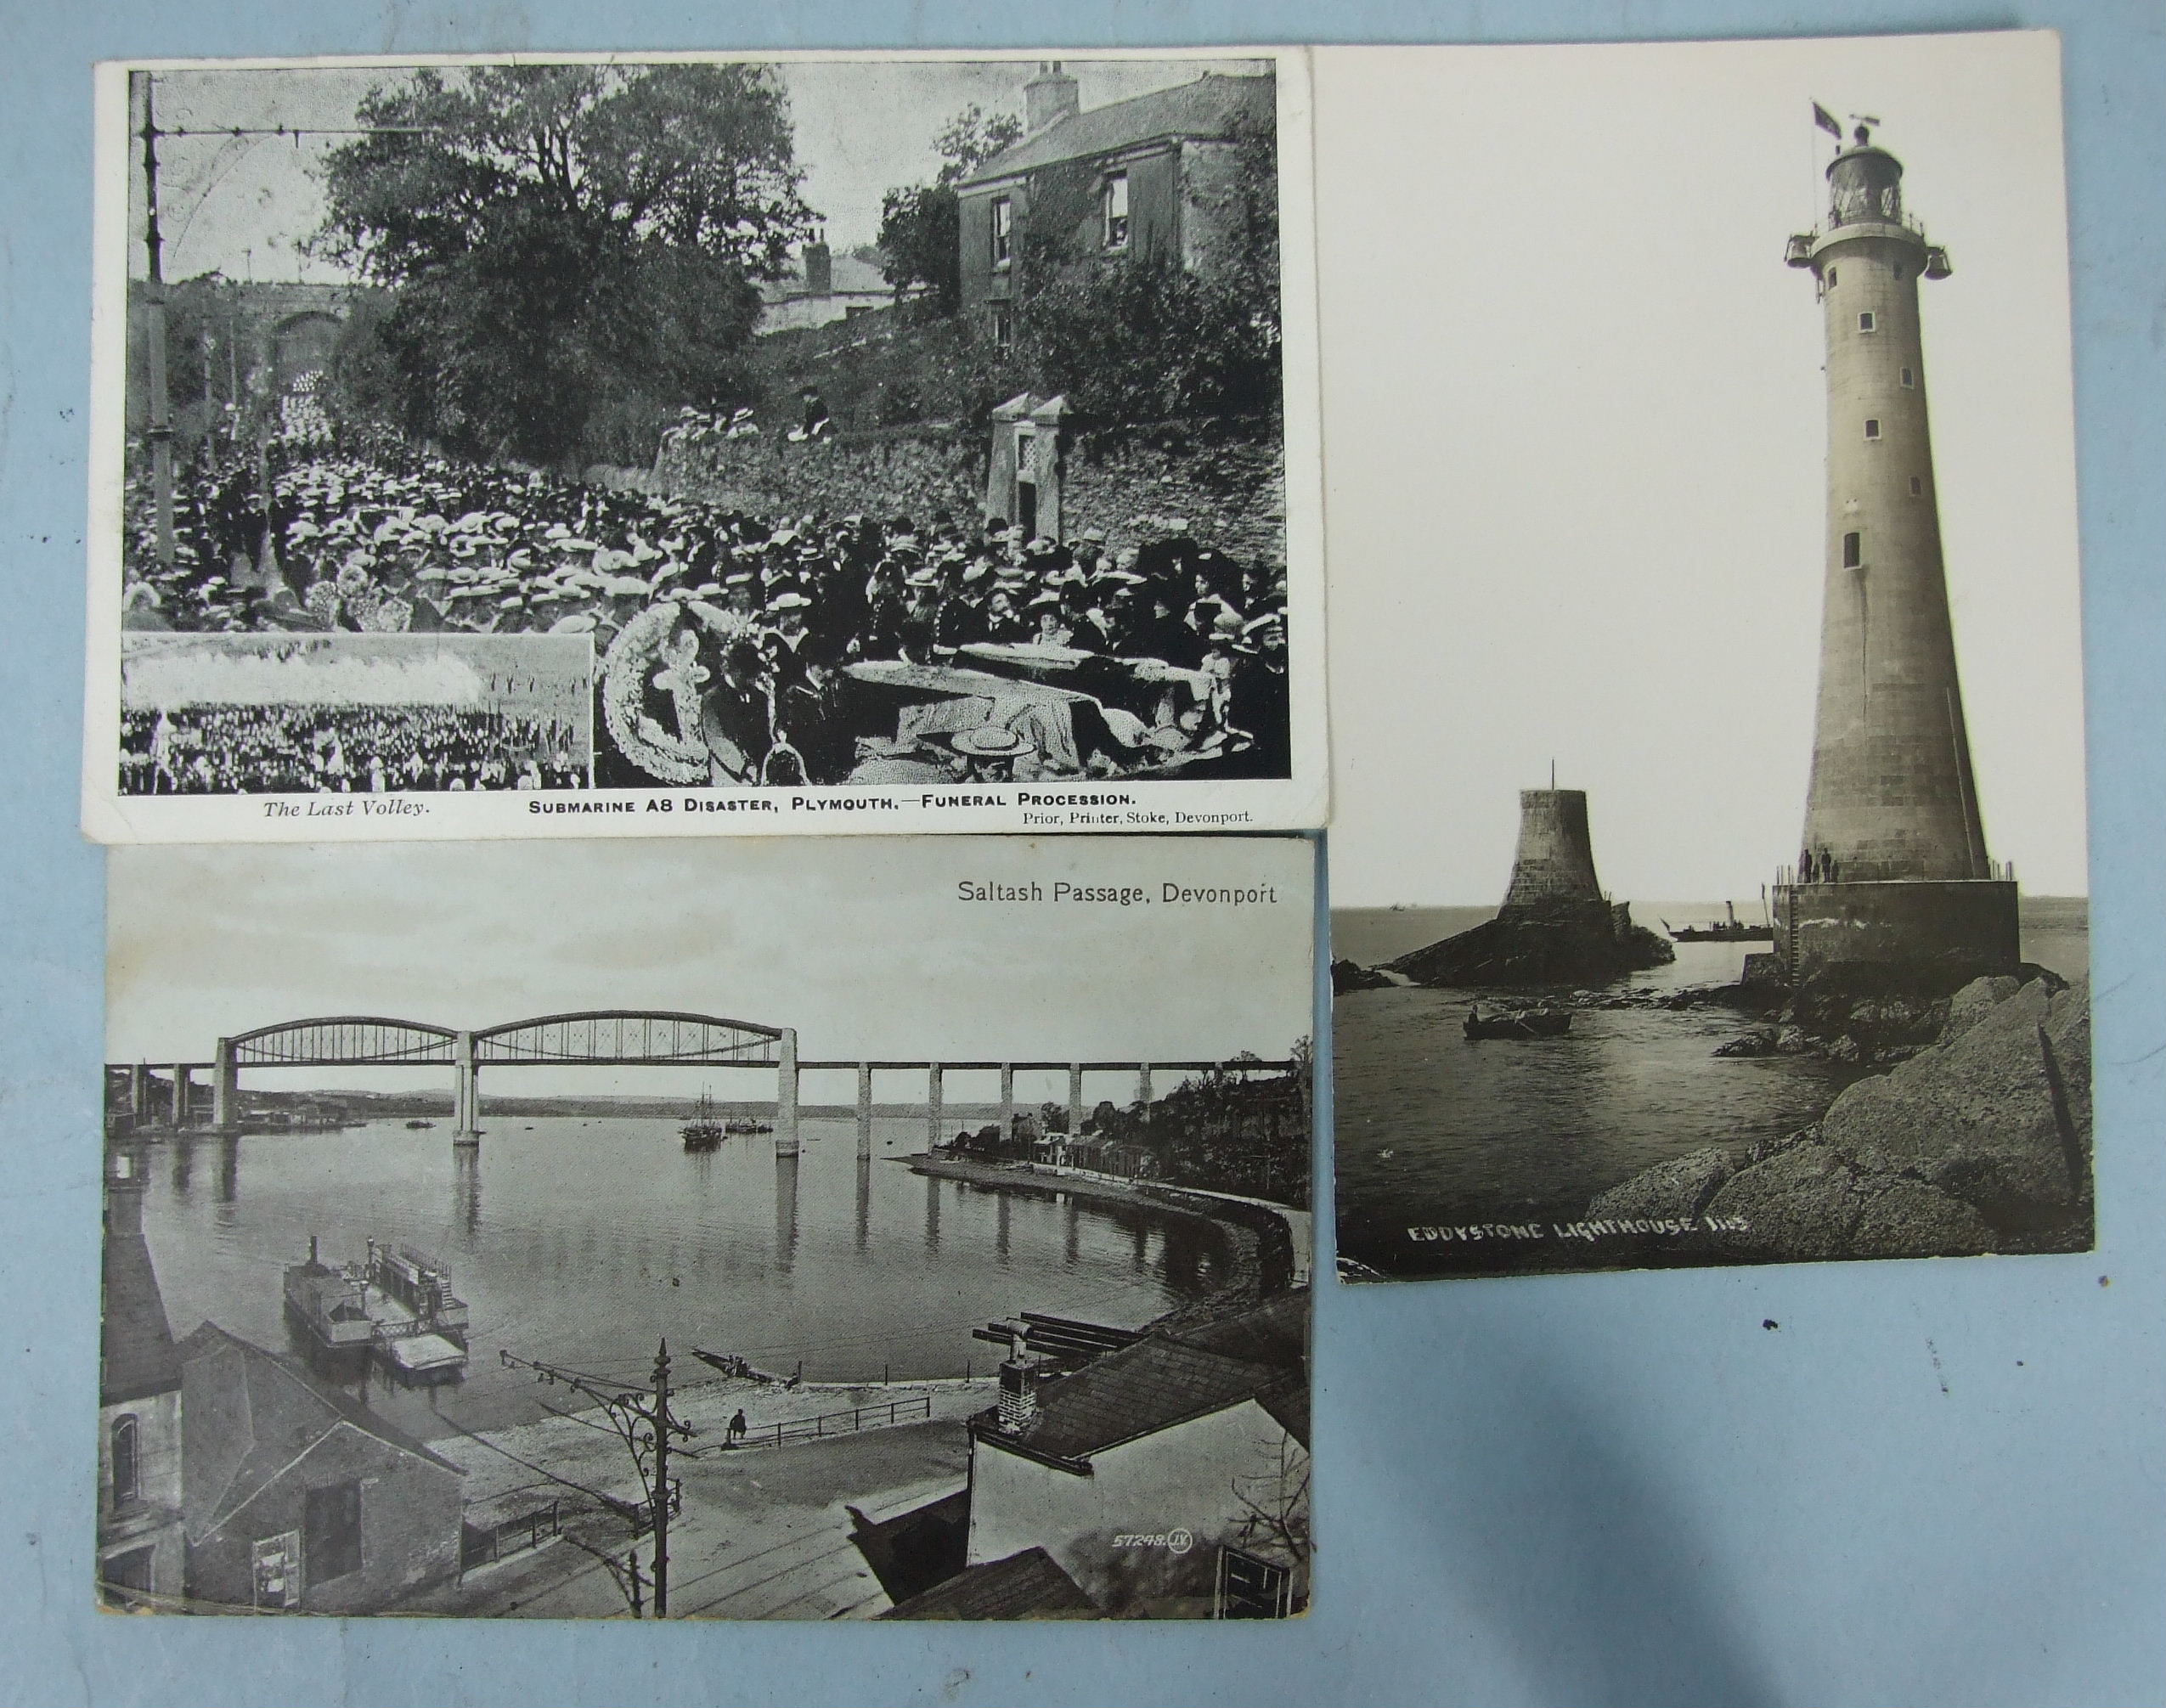 An album of 180 postcards of Plymouth including one of the submarine A8 disaster funeral procession,